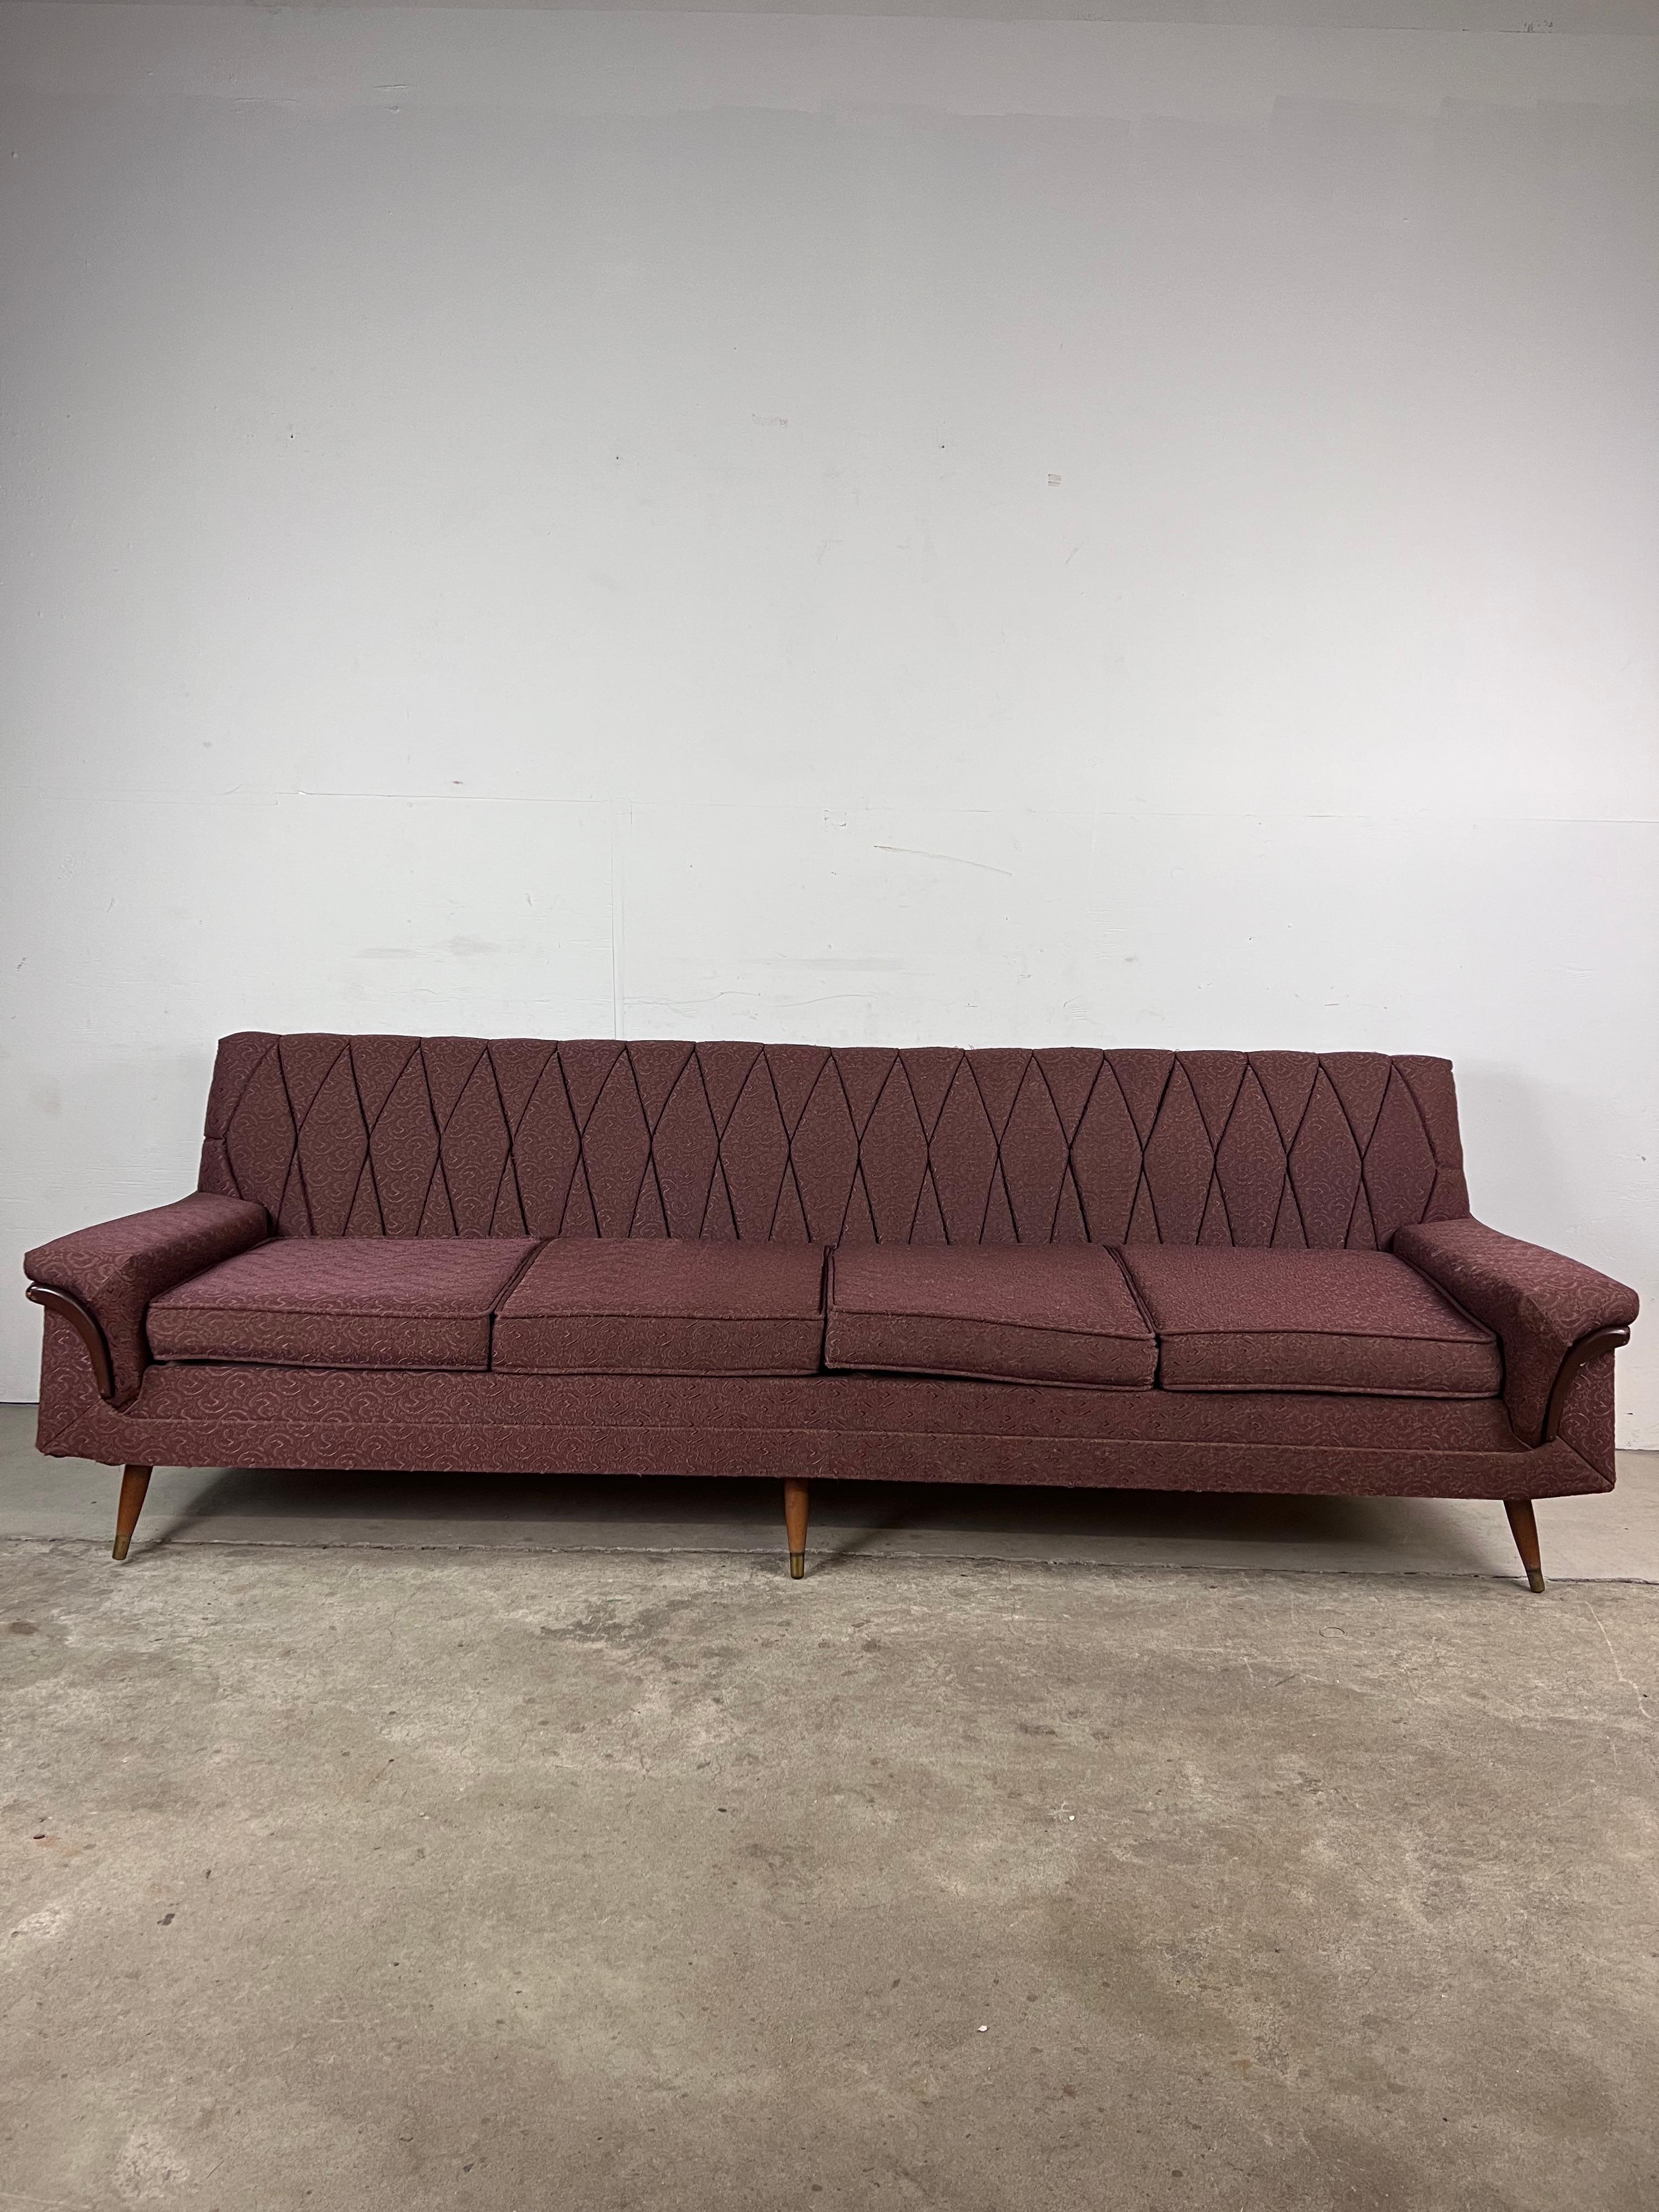 Mid Century Modern Four Seater Sofa with Vintage Upholstery In Good Condition For Sale In Freehold, NJ